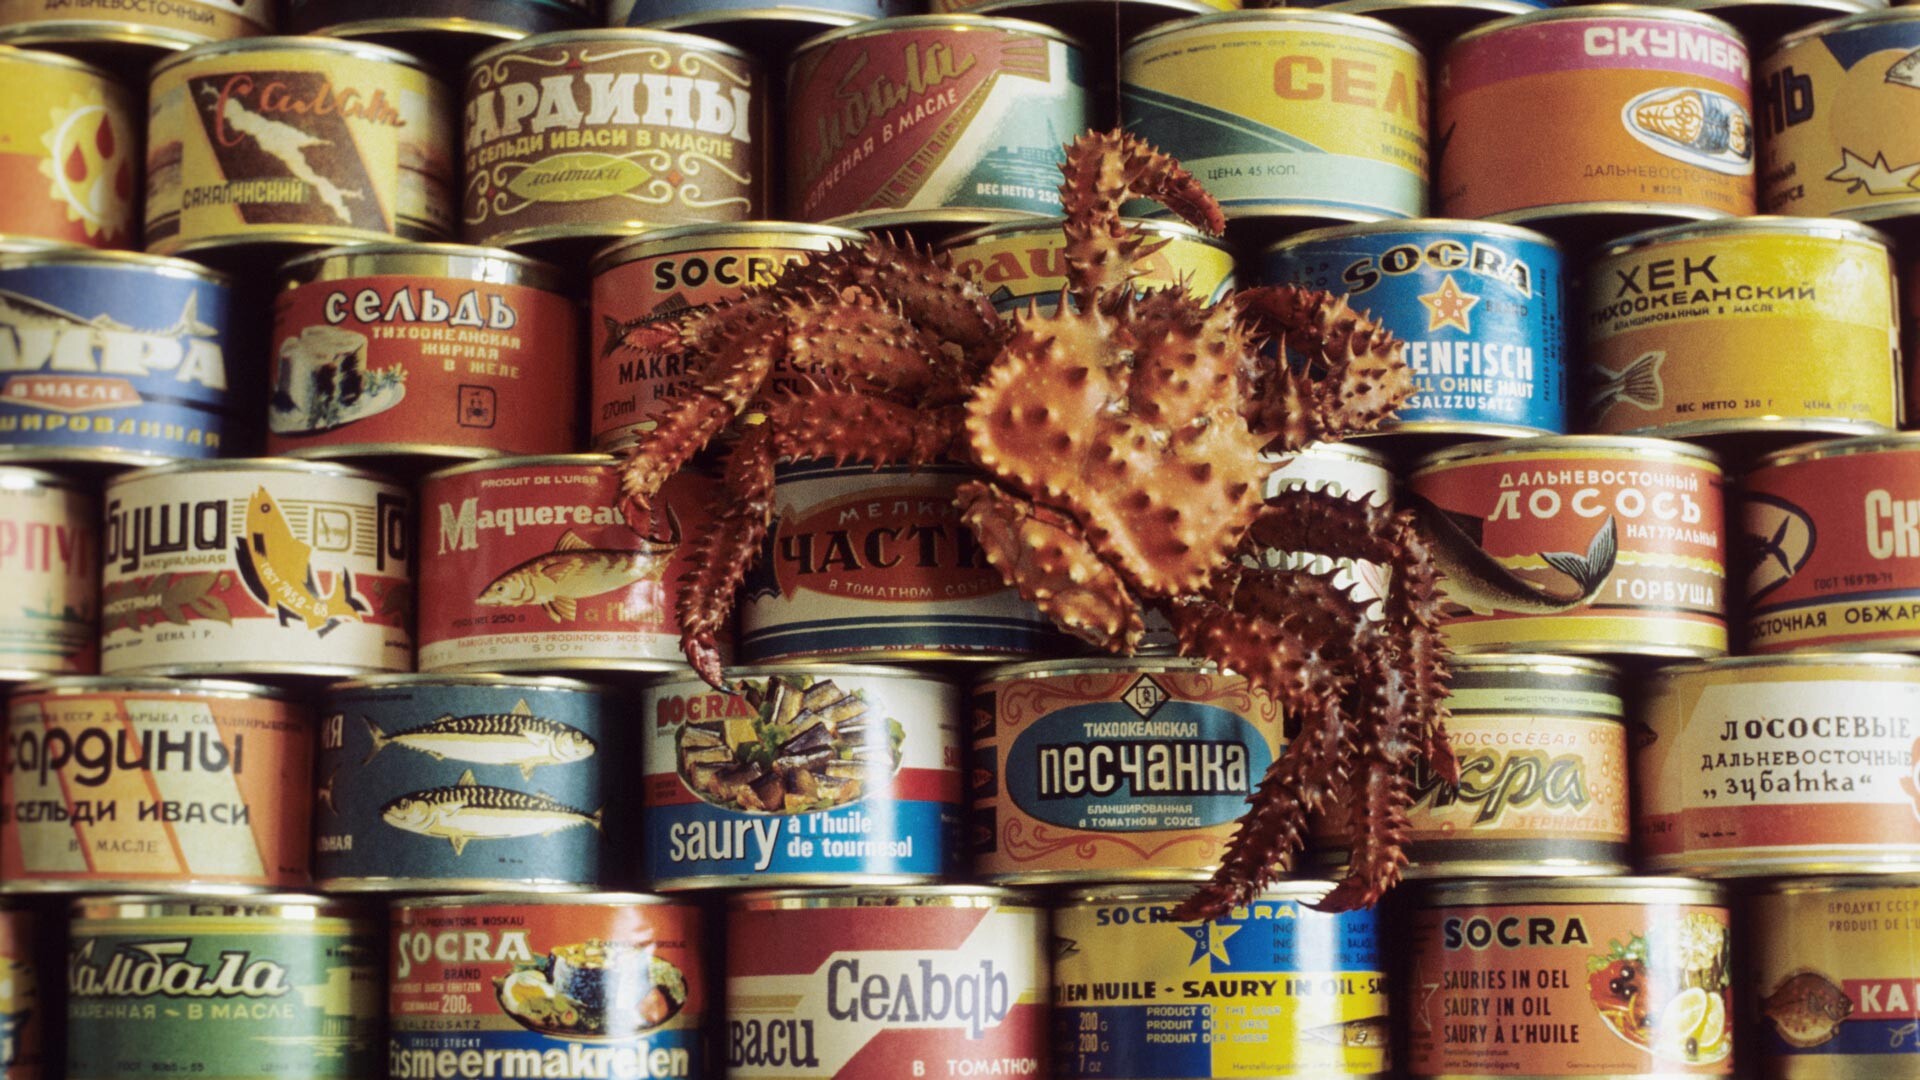 Canned seafood from the Sakhalin Region.